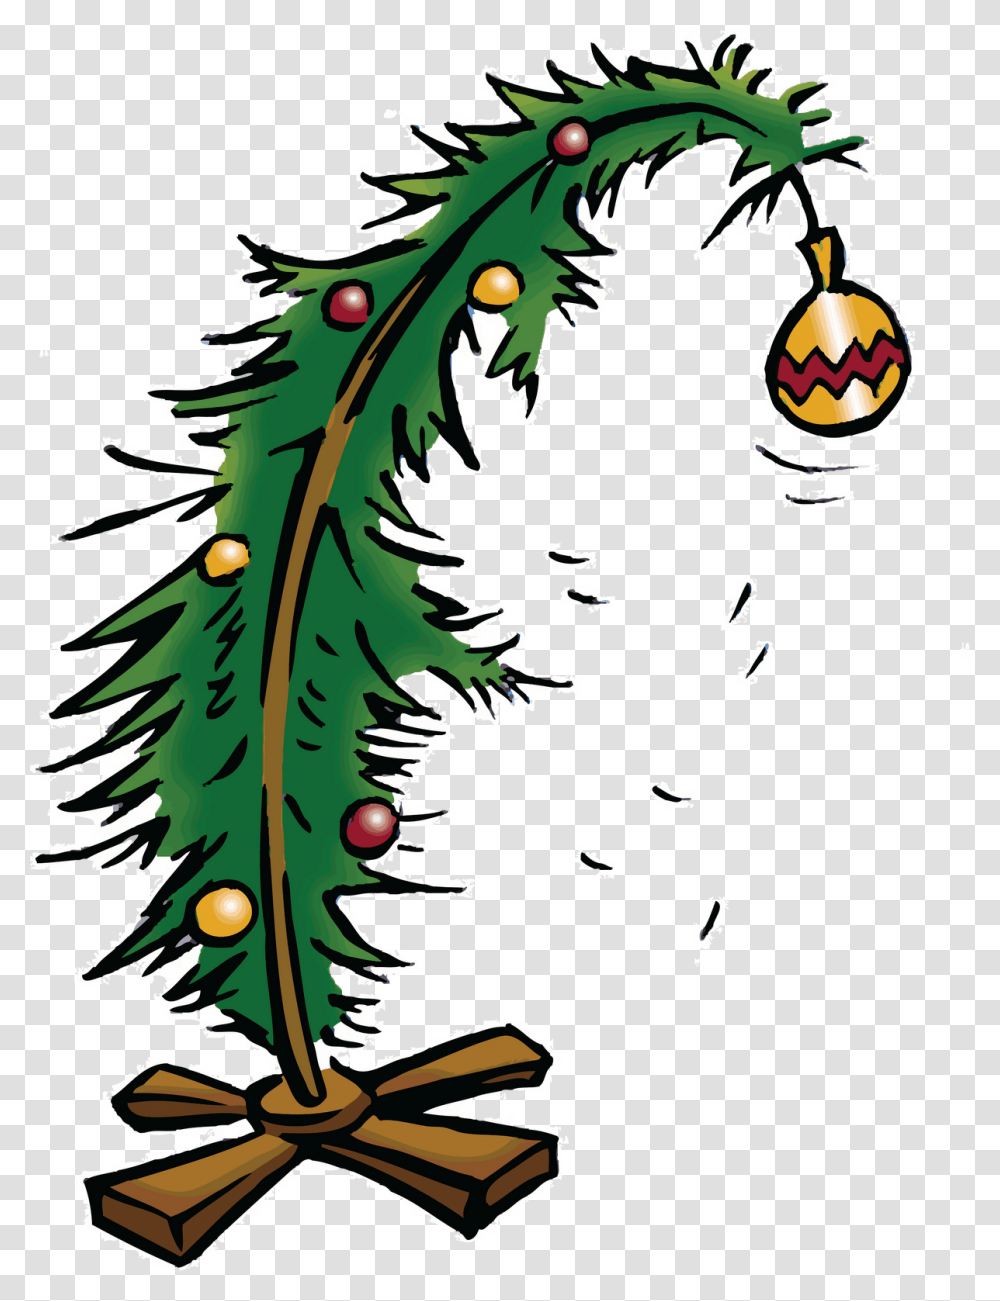 Supreme This Whoville Tree Is Inspired, Plant, Leaf, Fern, Pattern Transparent Png